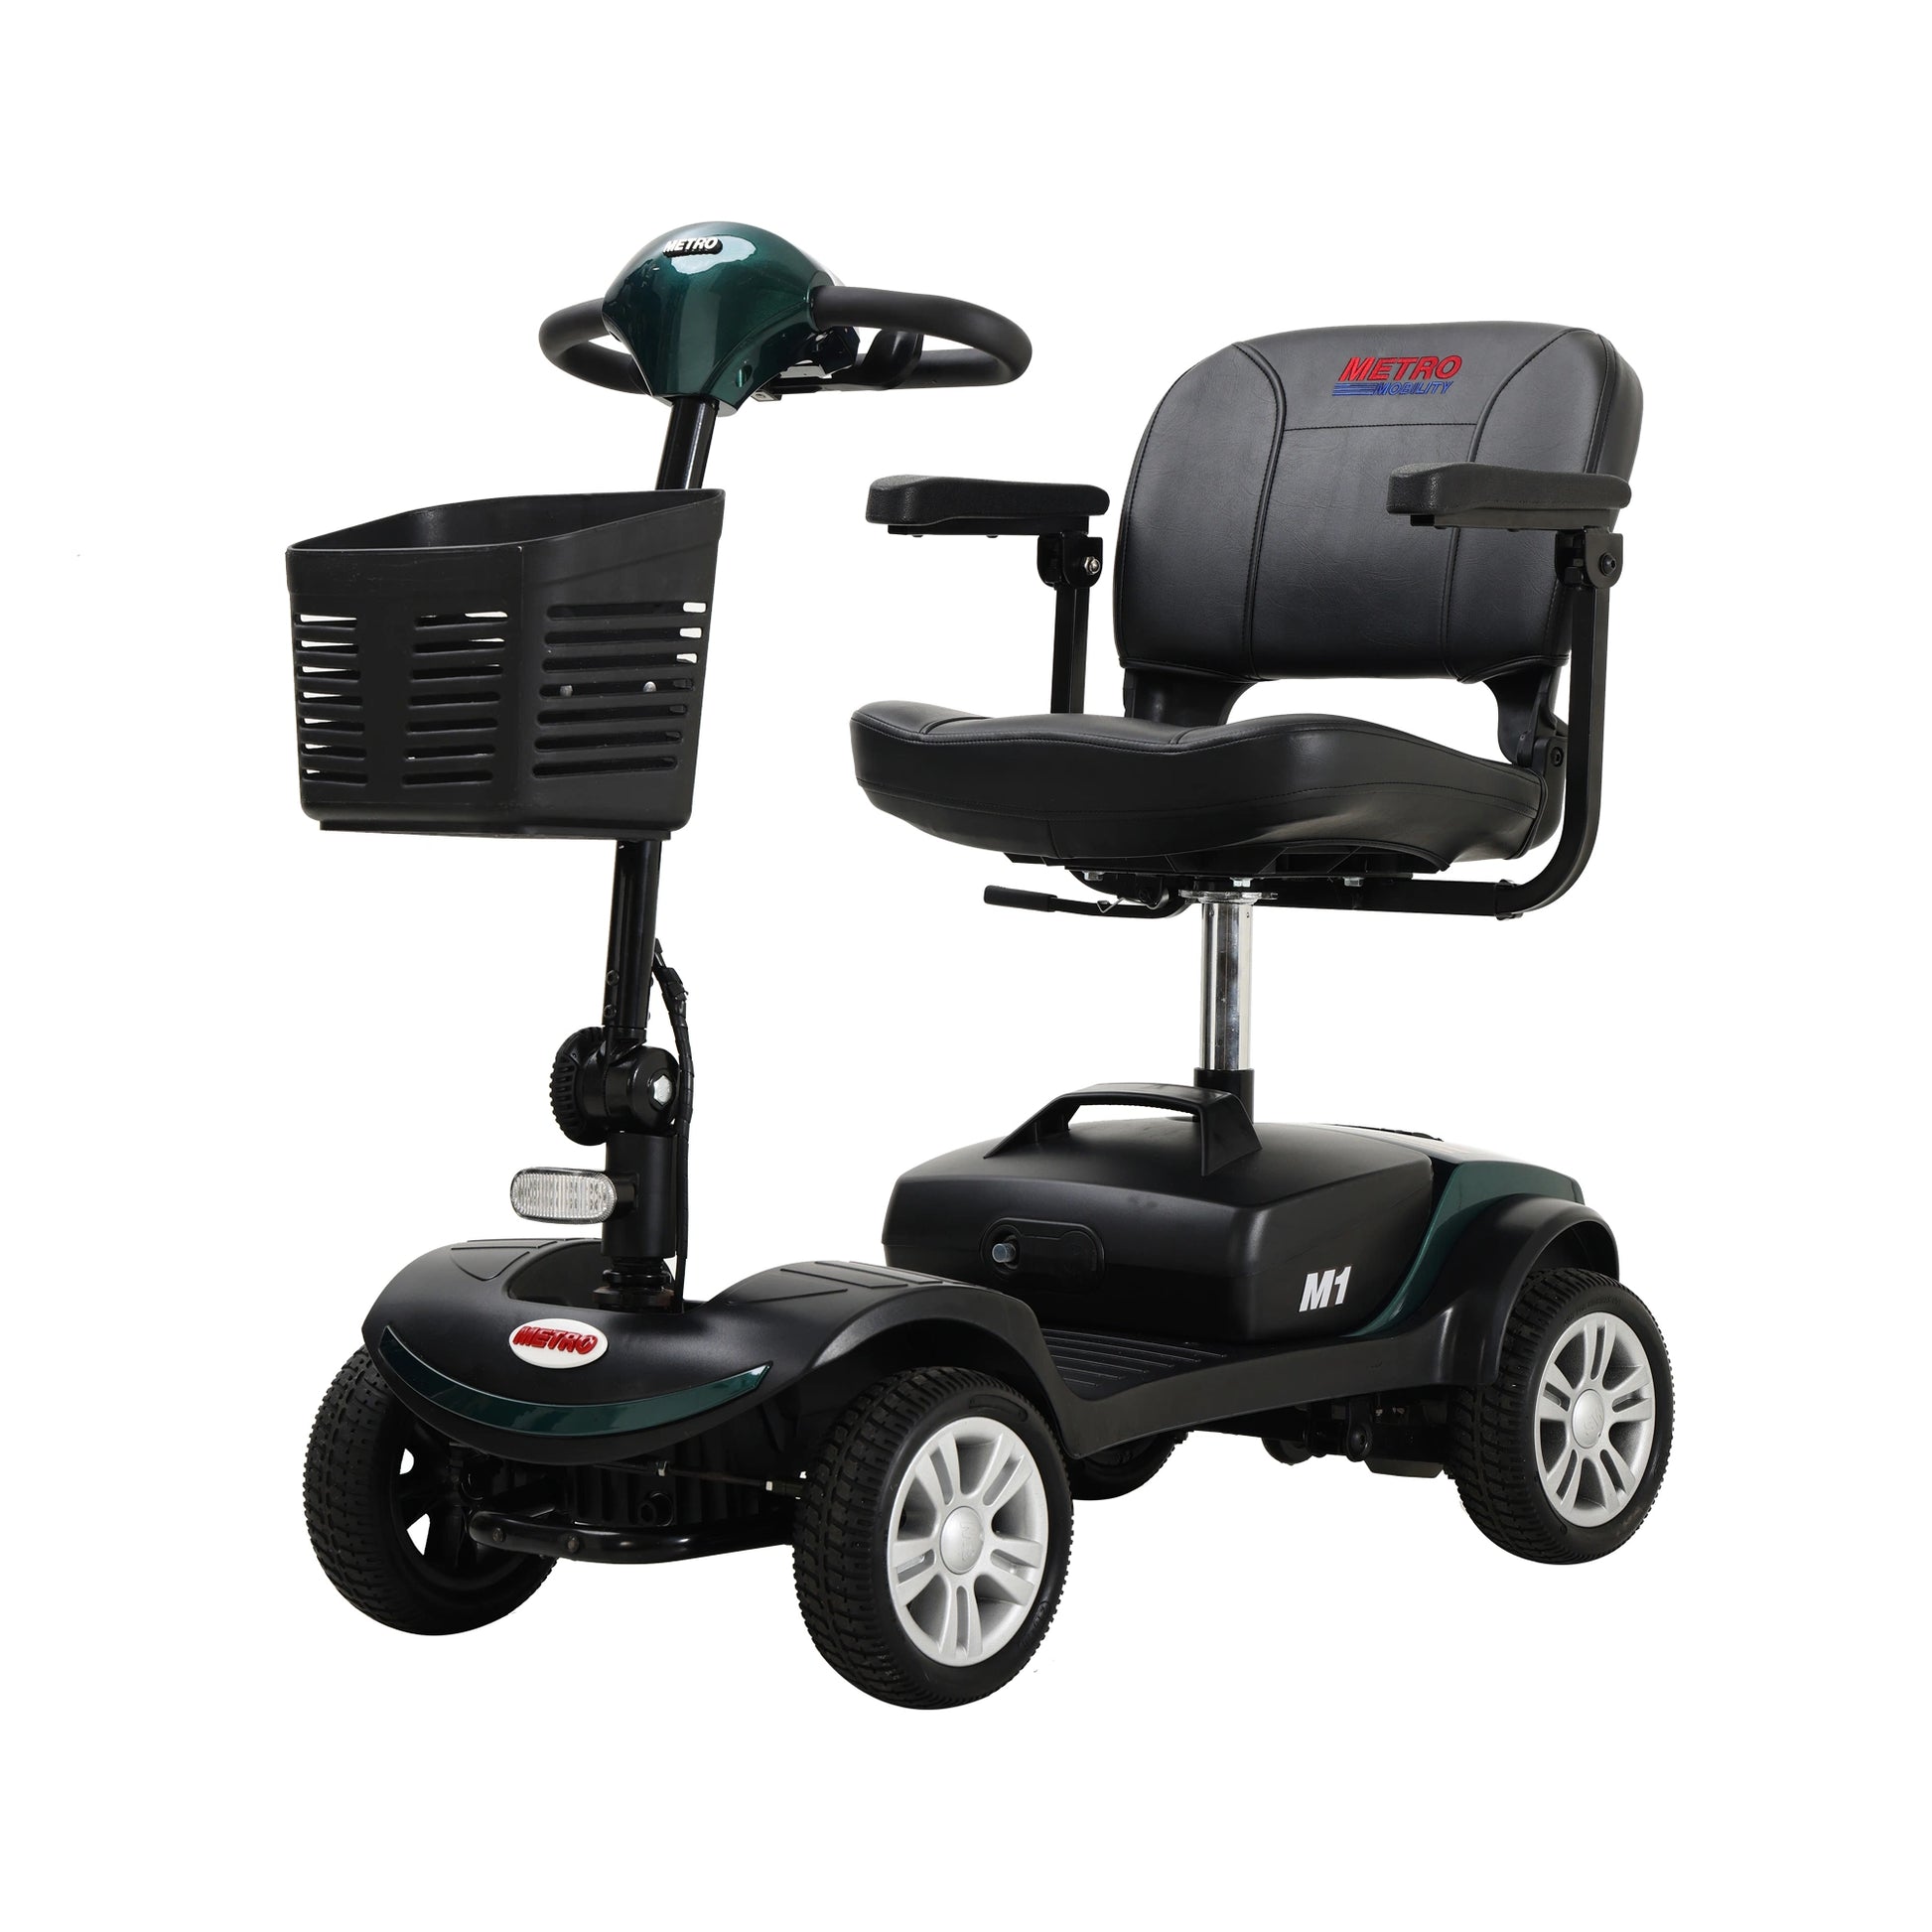 Lazy Bot™ W42933832 Compact Travel Mobility Scooter M1 EMERALD - Lazy Pro